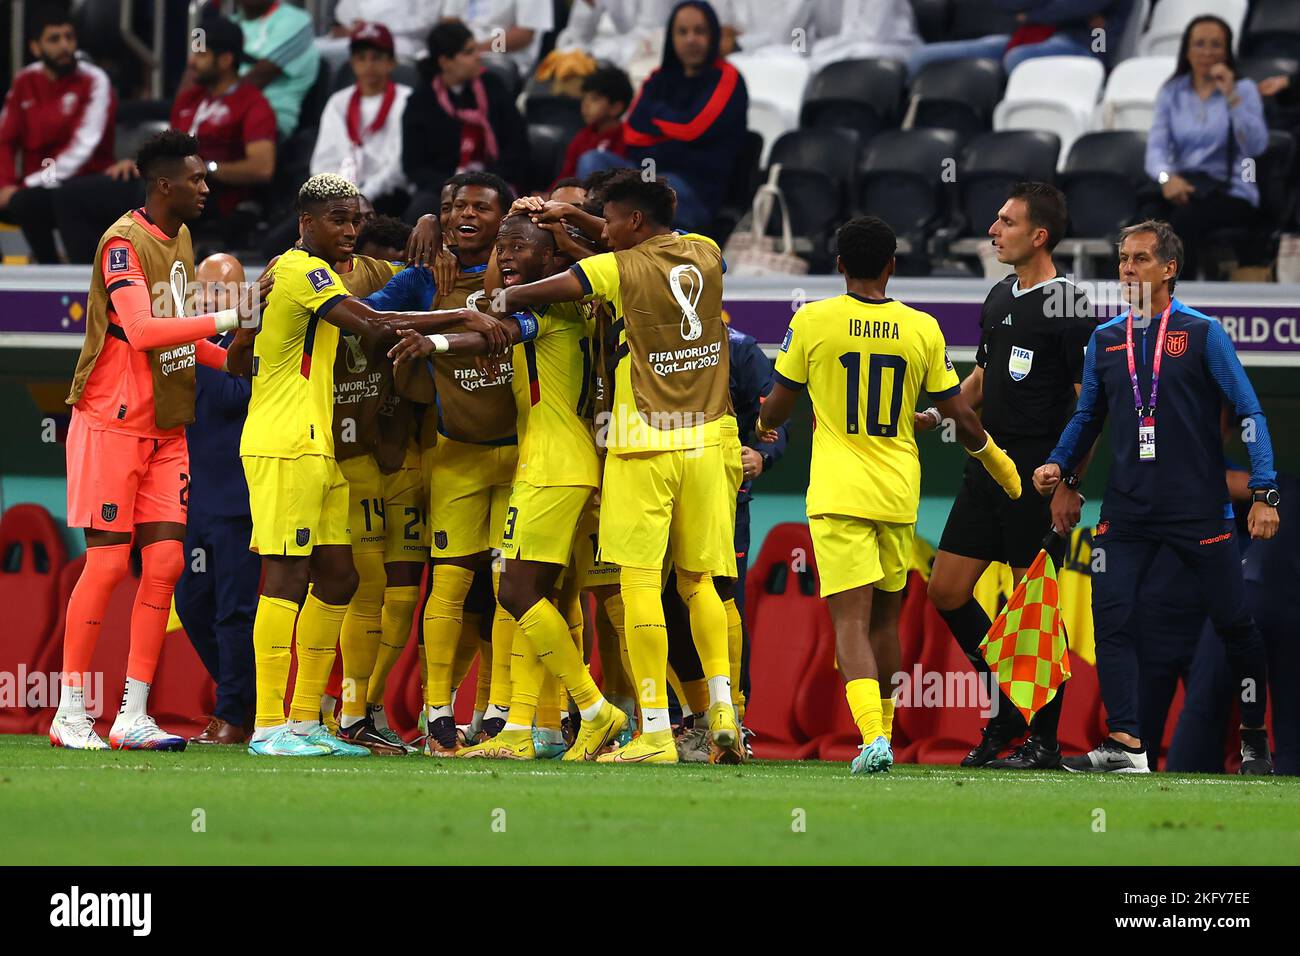 Doha, Qatar. 20th Nov, 2022. Enner Valencia of Ecuador is congratulated by his team-mates after scoring his side's second goal during the 2022 FIFA World Cup Group A match at the Al Bayt Stadium in Doha, Qatar on November 20, 2022. Photo by Chris Brunskill/UPI Credit: UPI/Alamy Live News Stock Photo